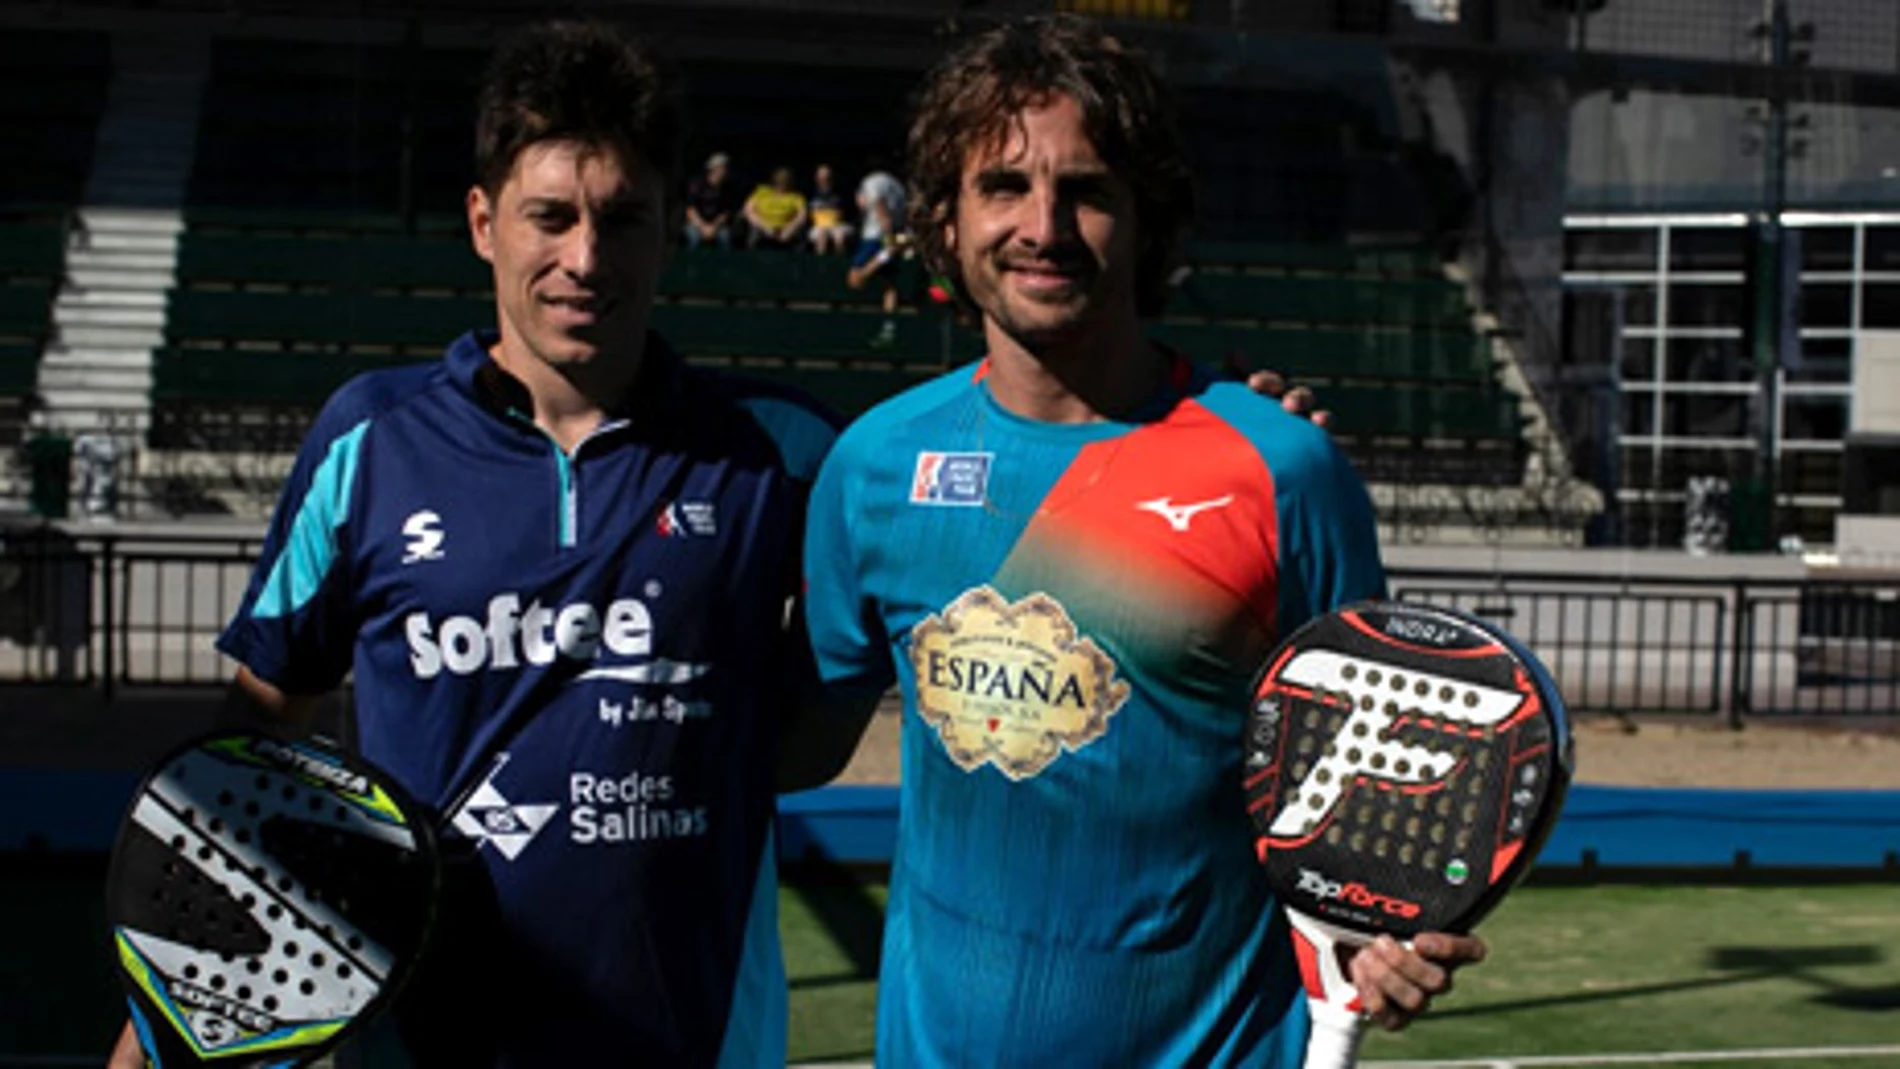 ‘Chico’ Gomes y Fede Quiles